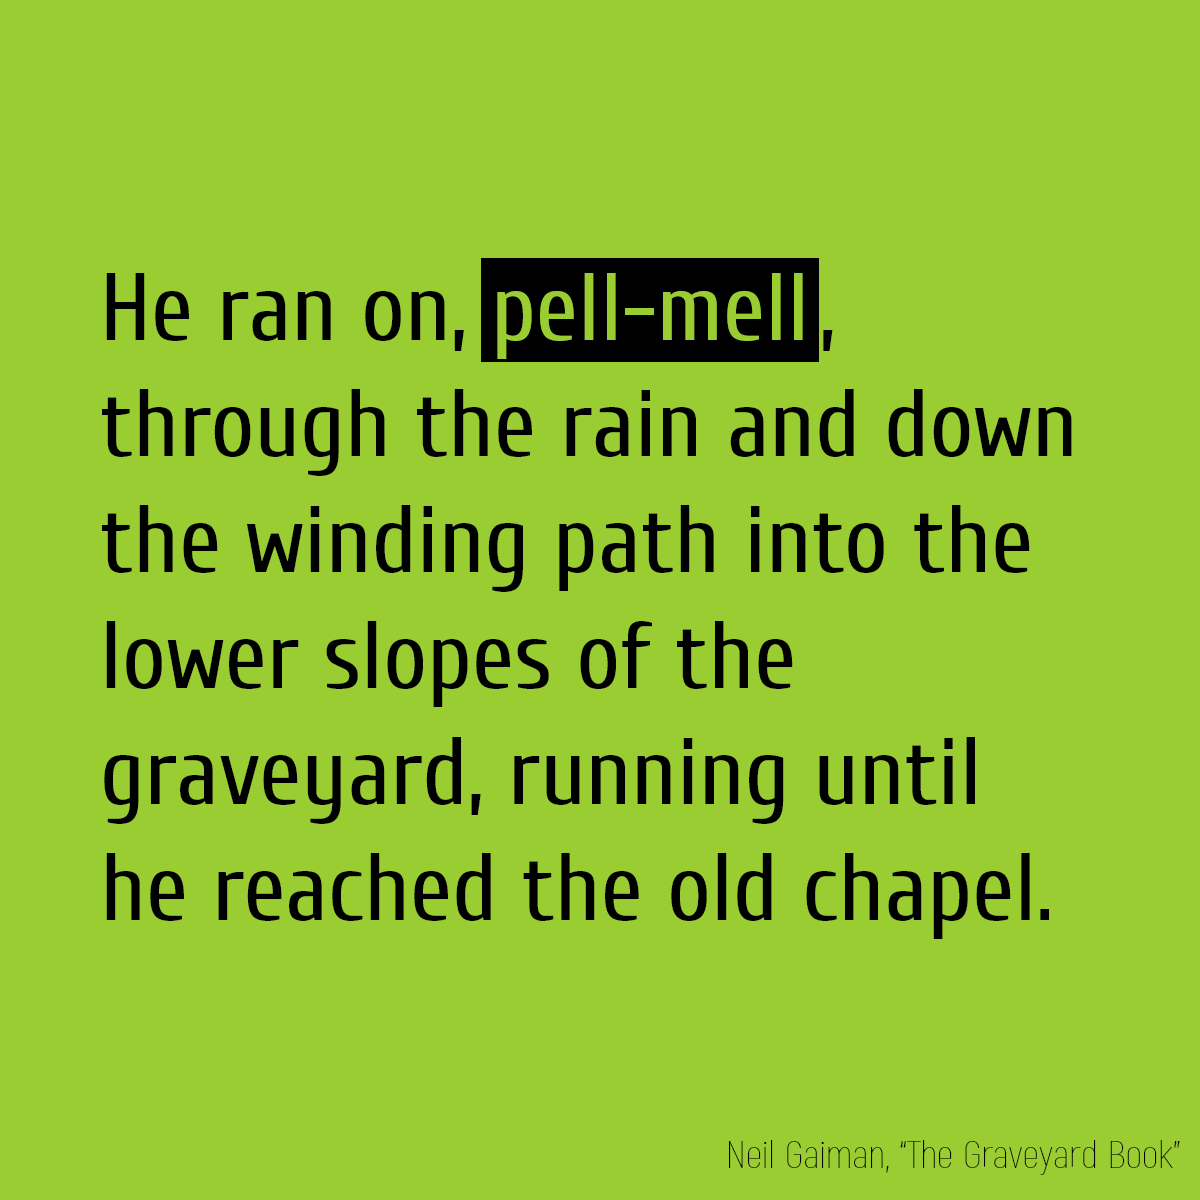 He ran on, **pell-mell**, through the rain and down the winding path into the lower slopes of the graveyard, running until he reached the old chapel.